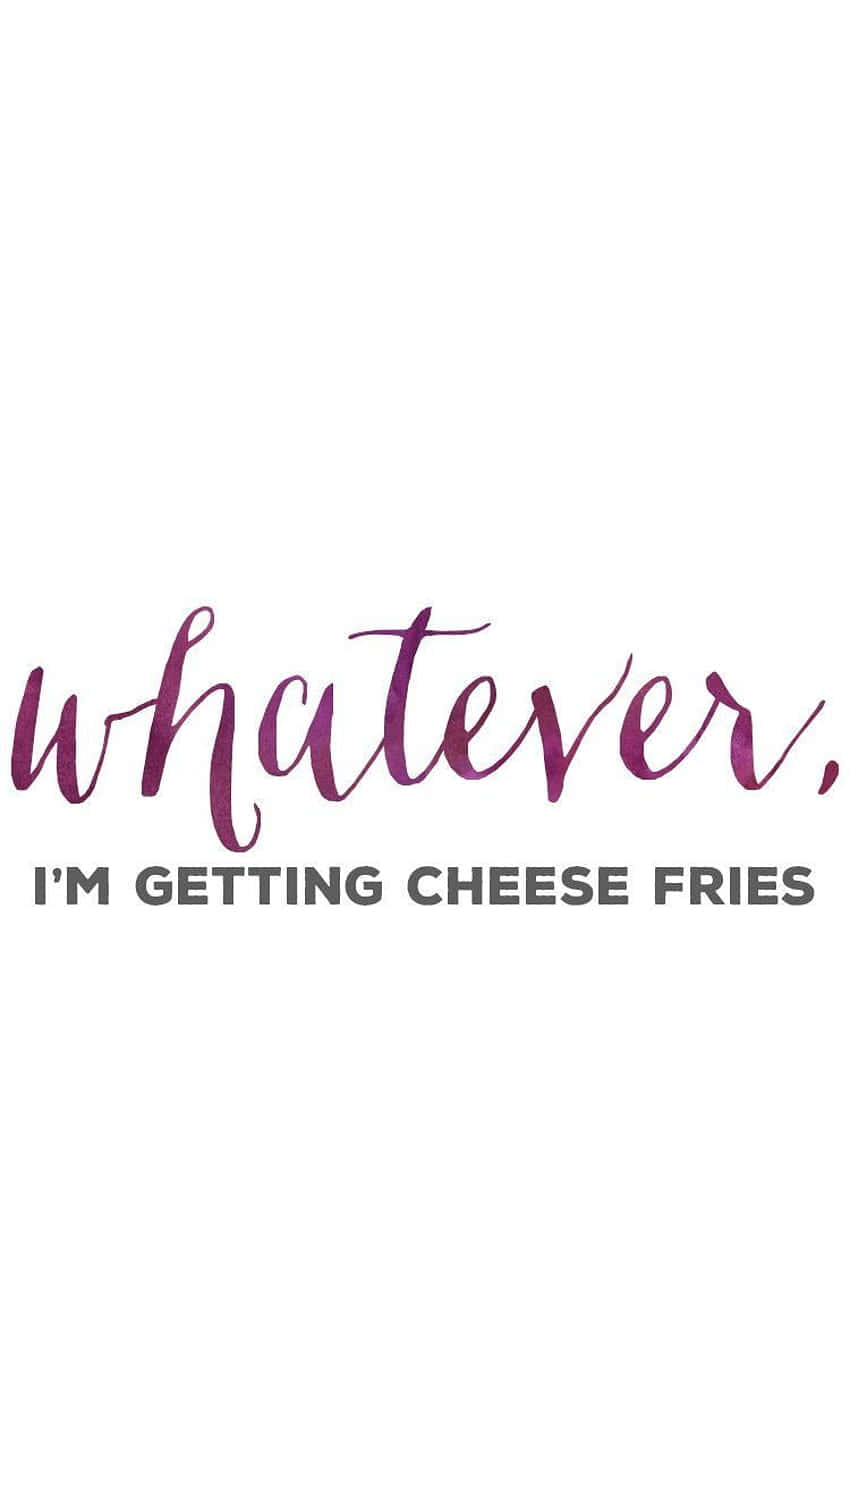 Whatever I'm Getting Cheese Fries Logo Background